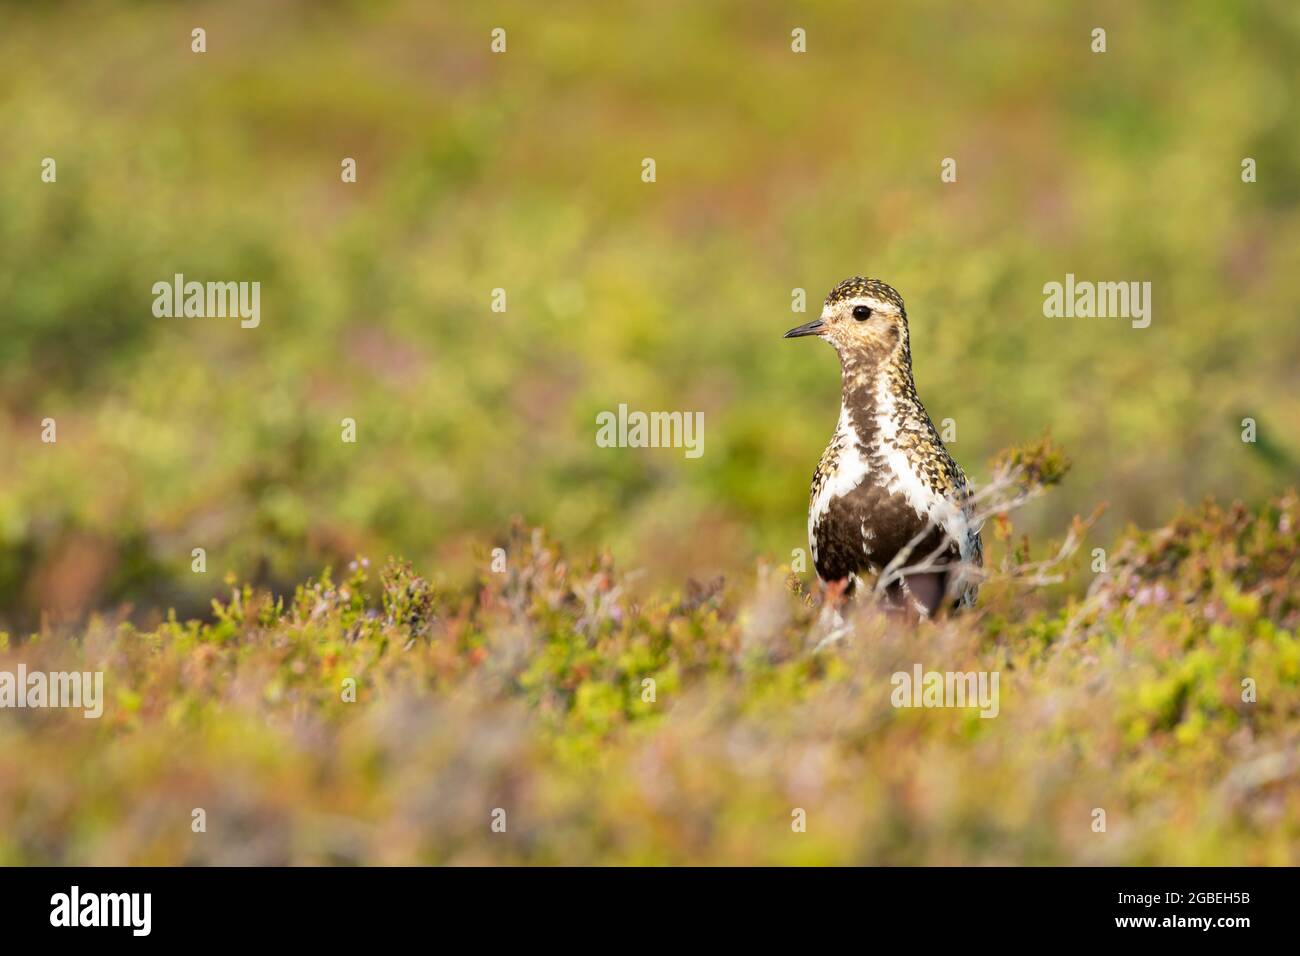 Beautiful European golden plover, Pluvialis apricaria, standing in its colorful habitat in Finnish wilderness at Riisitunturi National Park, Finland Stock Photo